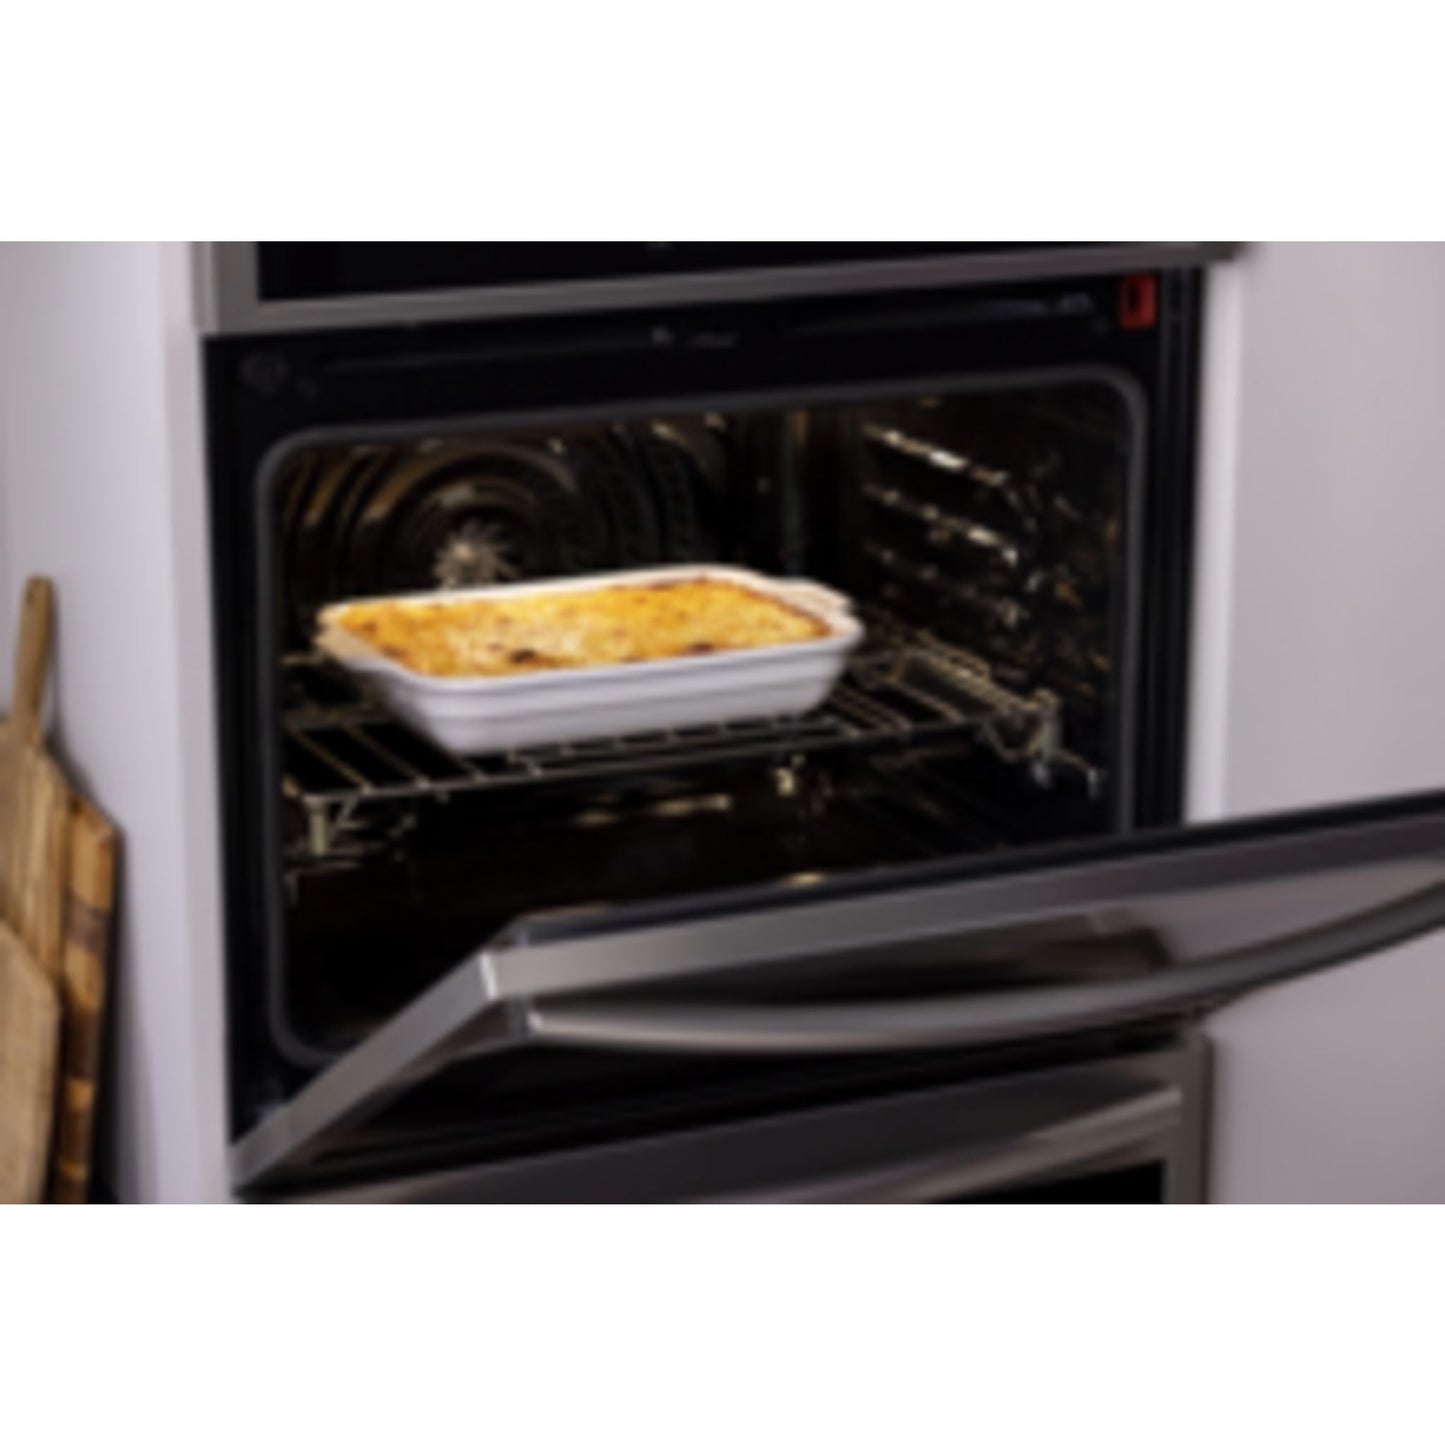 Frigidaire Gallery 30" True Convection Wall Oven (GCWS3067AD) - Black Stainless, SmudgeProof